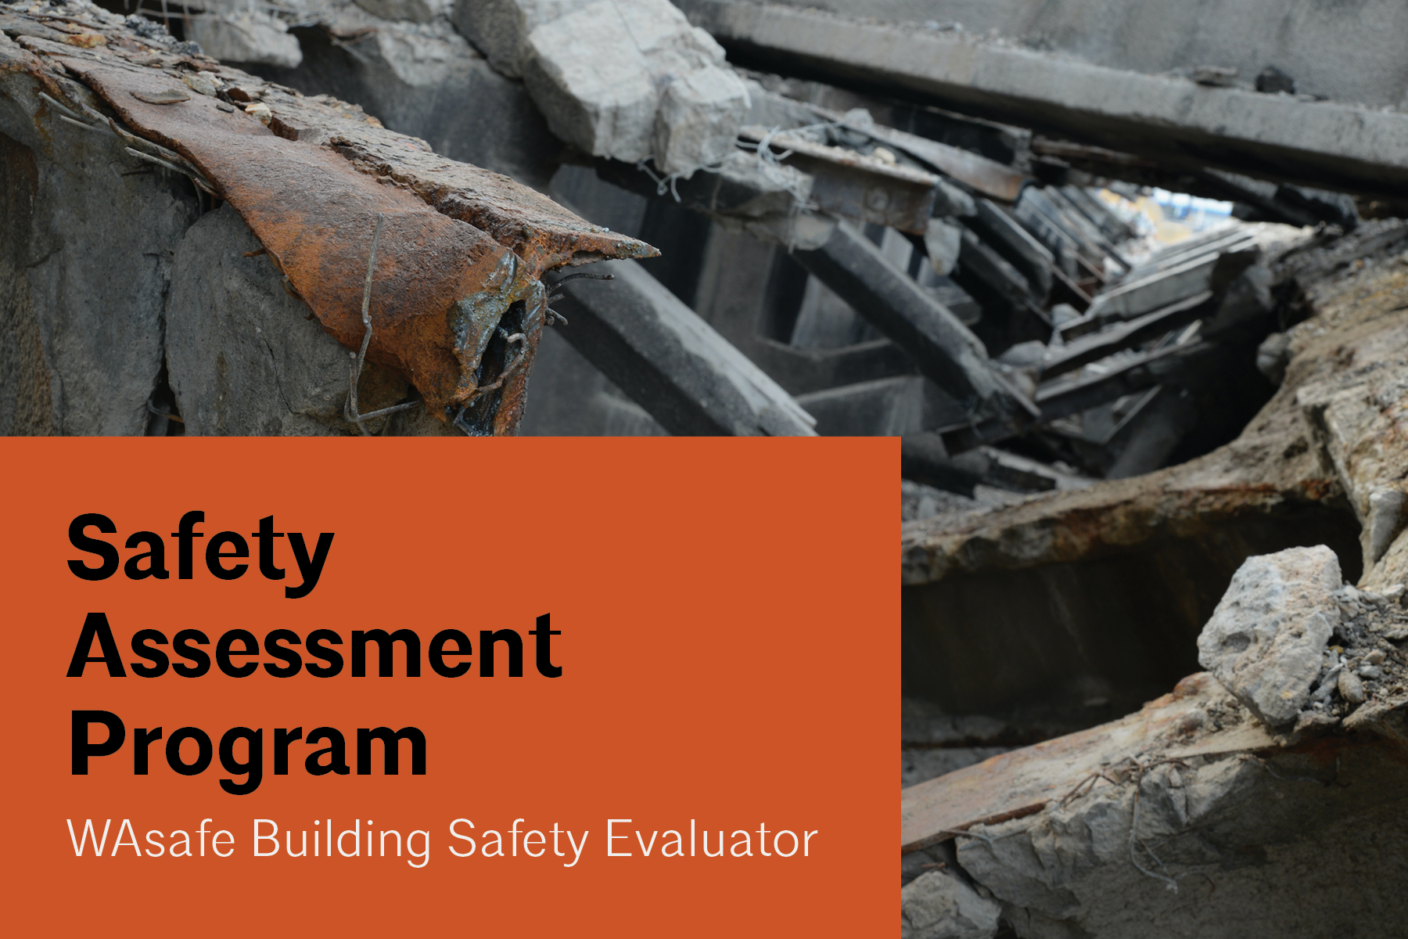 Intended for Washington state architects, architects-in-training, engineers, and/or certified building inspectors interested in better understanding seismic risks in our region, as well as having the opportunity to assist in recovery efforts.